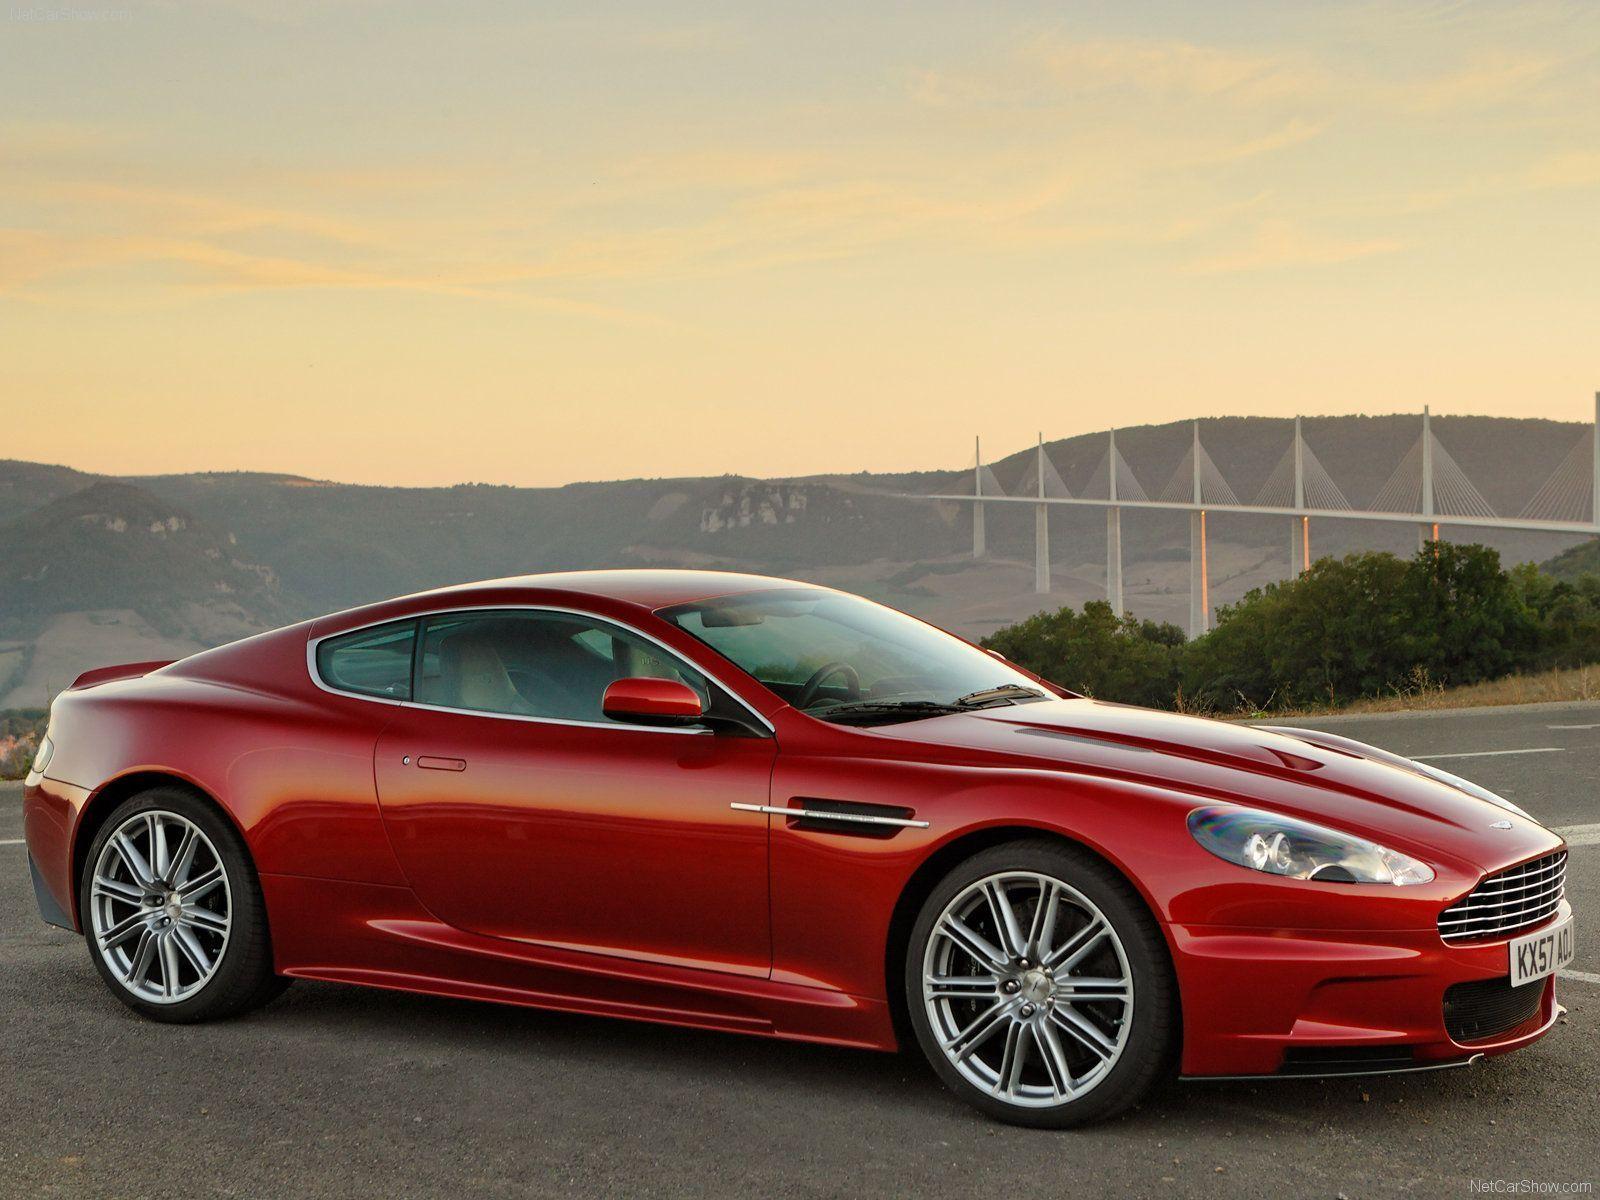 Check this out! our new amazing Aston Martin DBS wallpaper. DBS